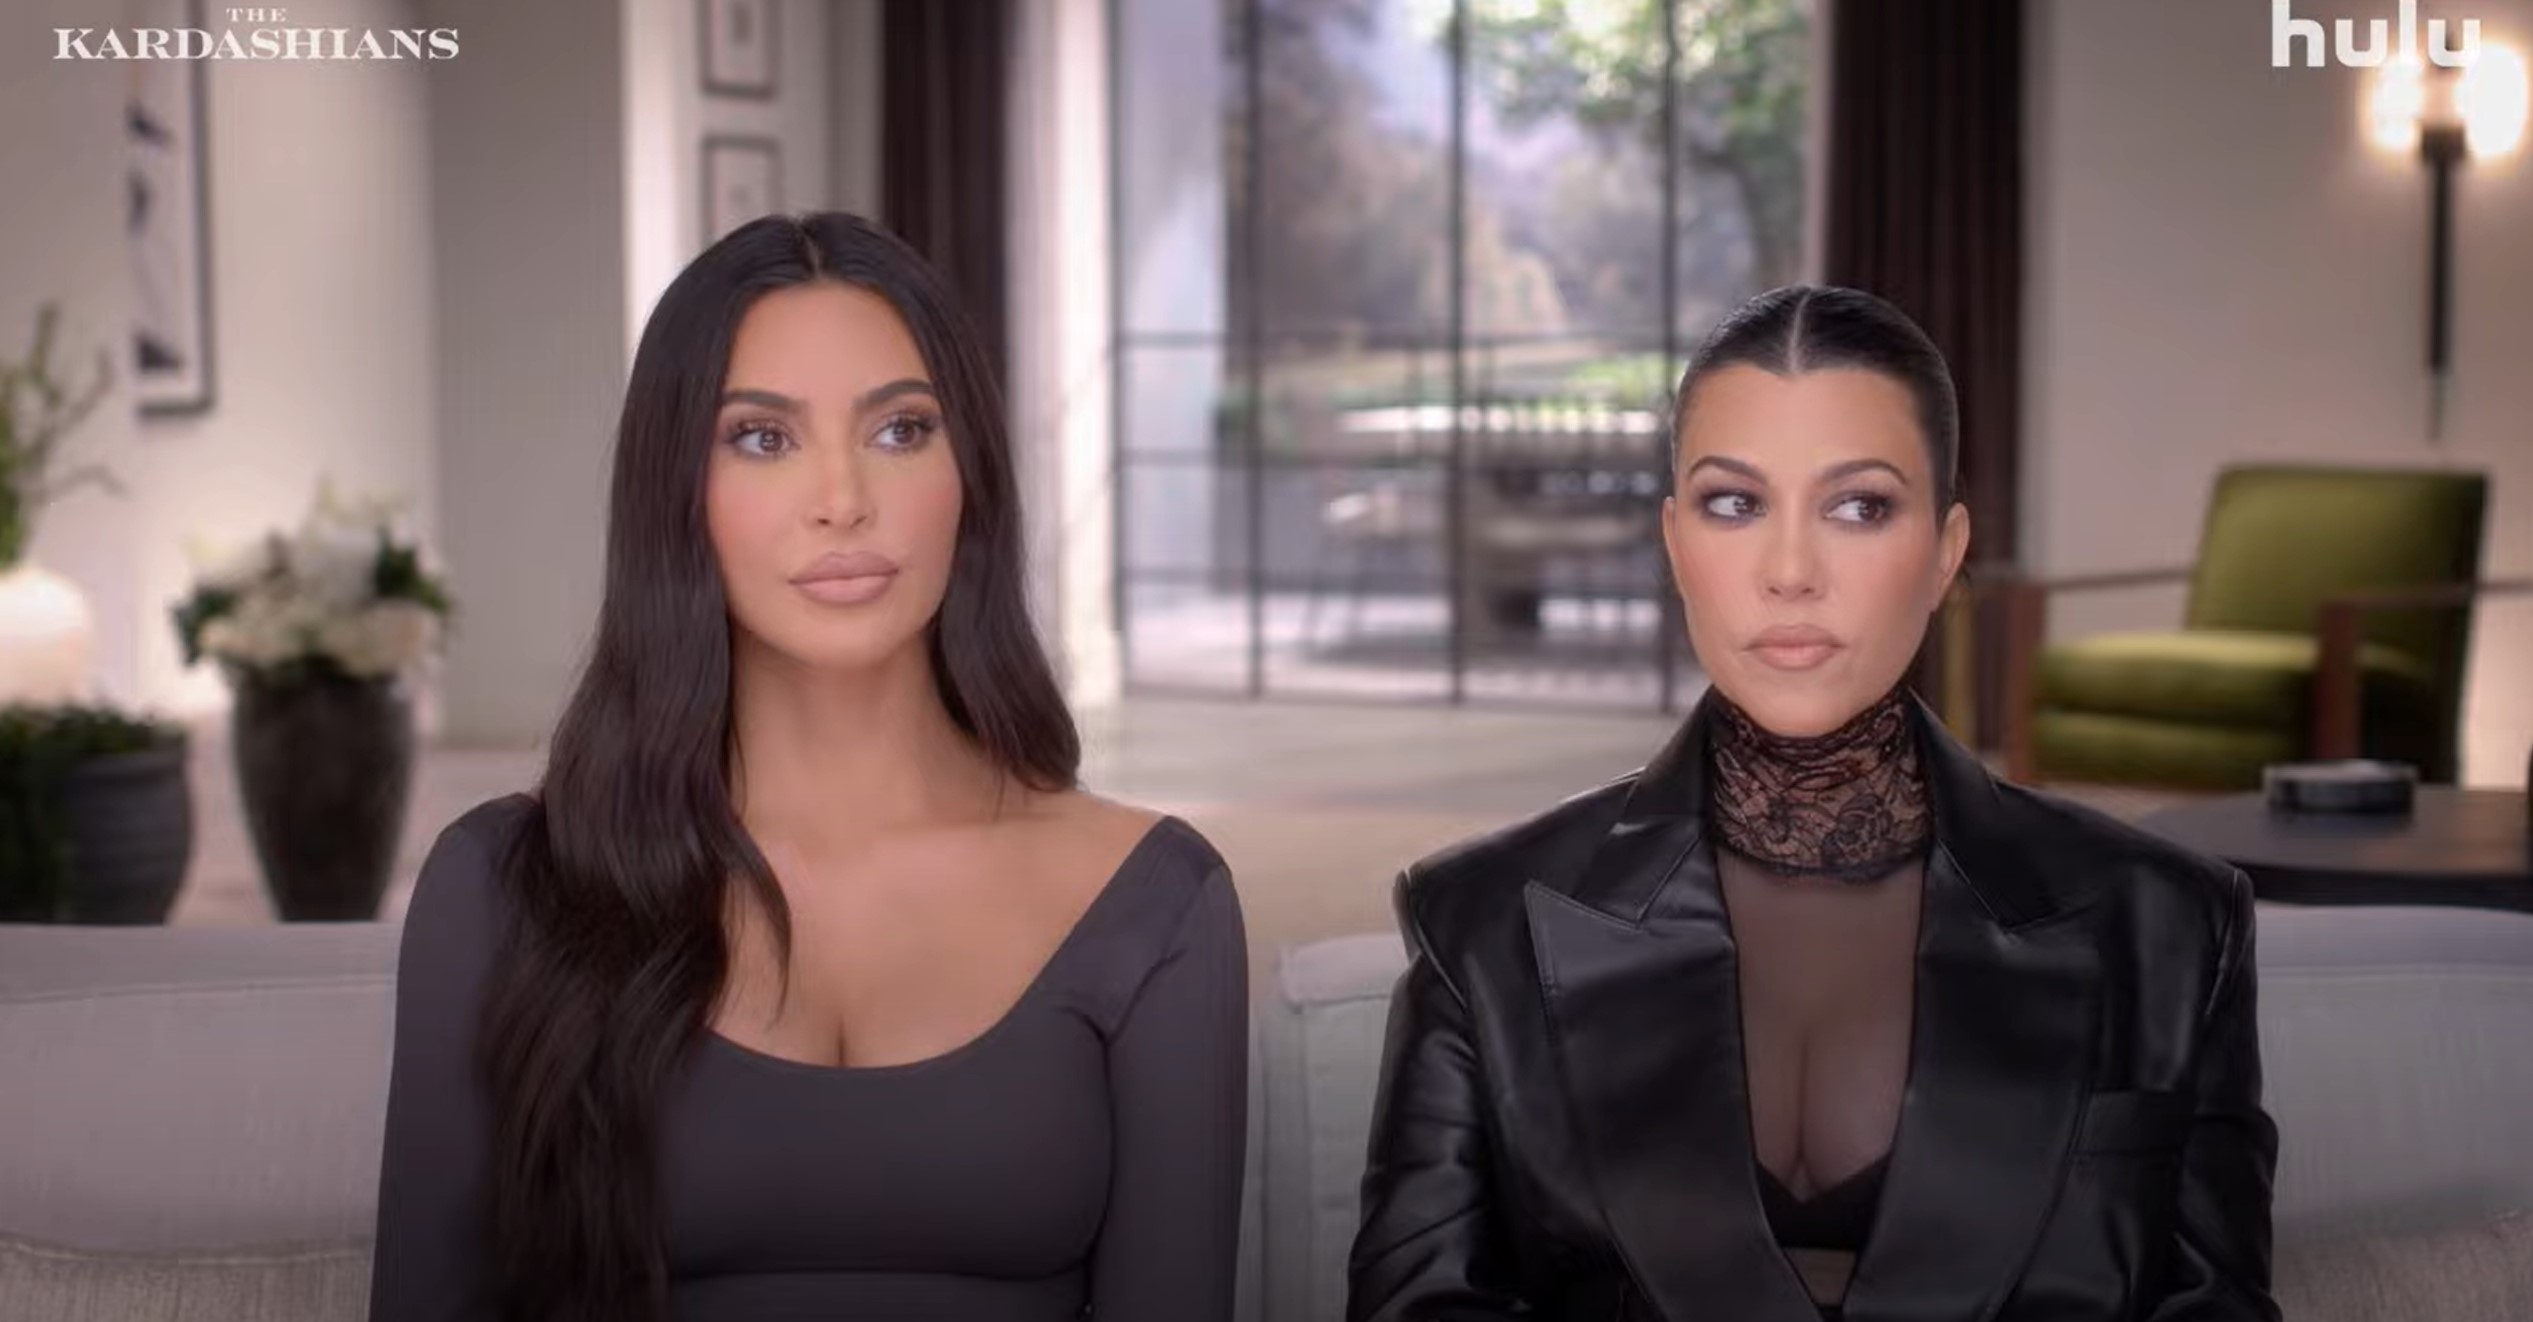 Khloe's re-branding has reportedly left her sisters Kim and Kourtney 'jealous'